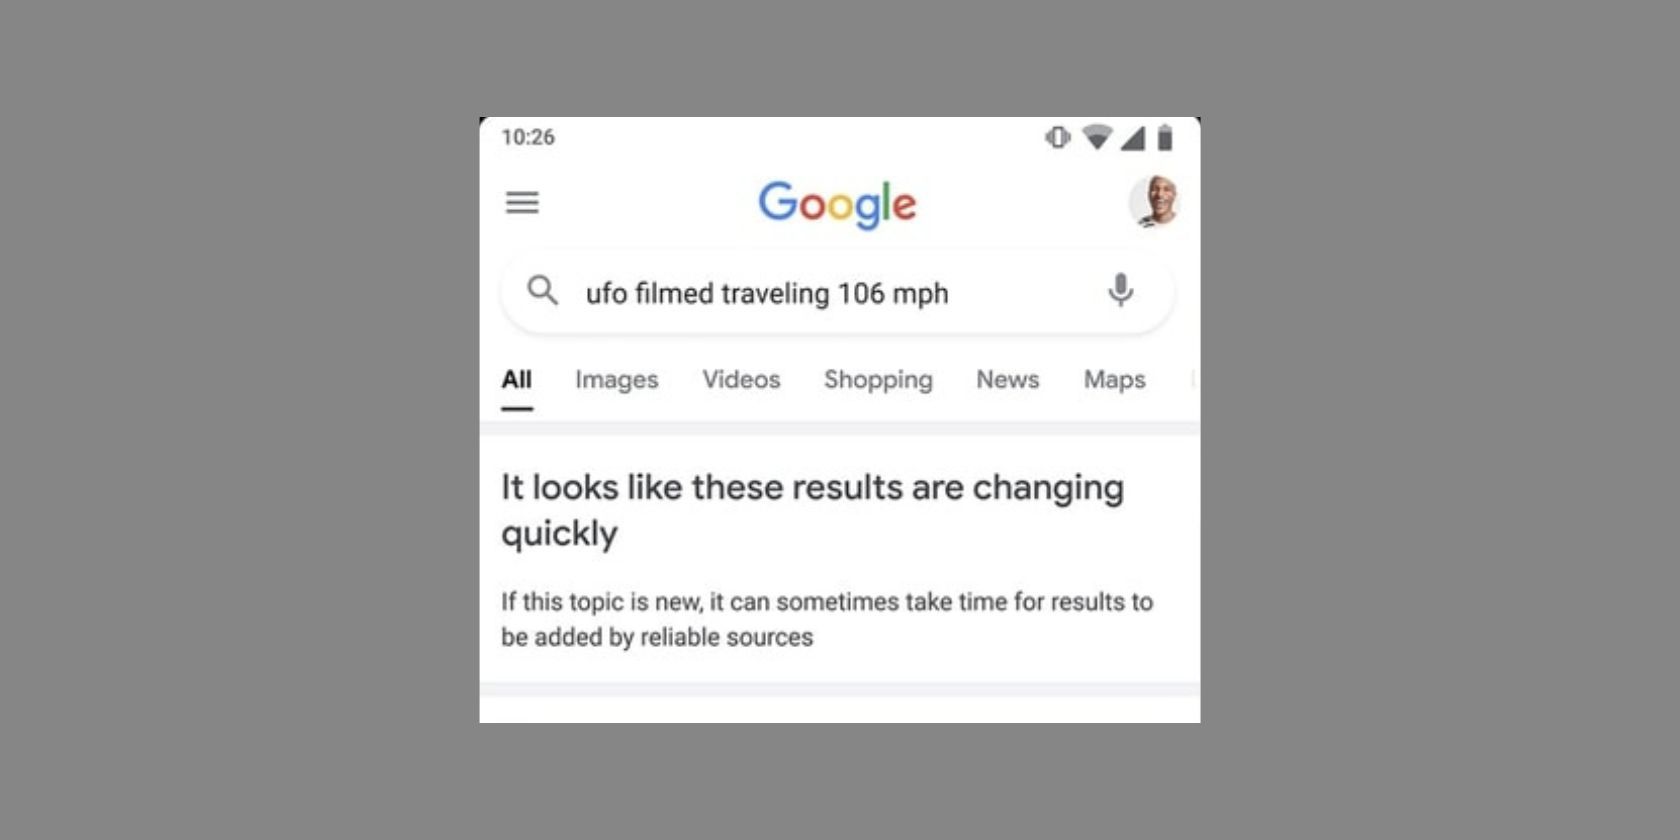 Screenhsot of a Google page with an alert to wait for more results